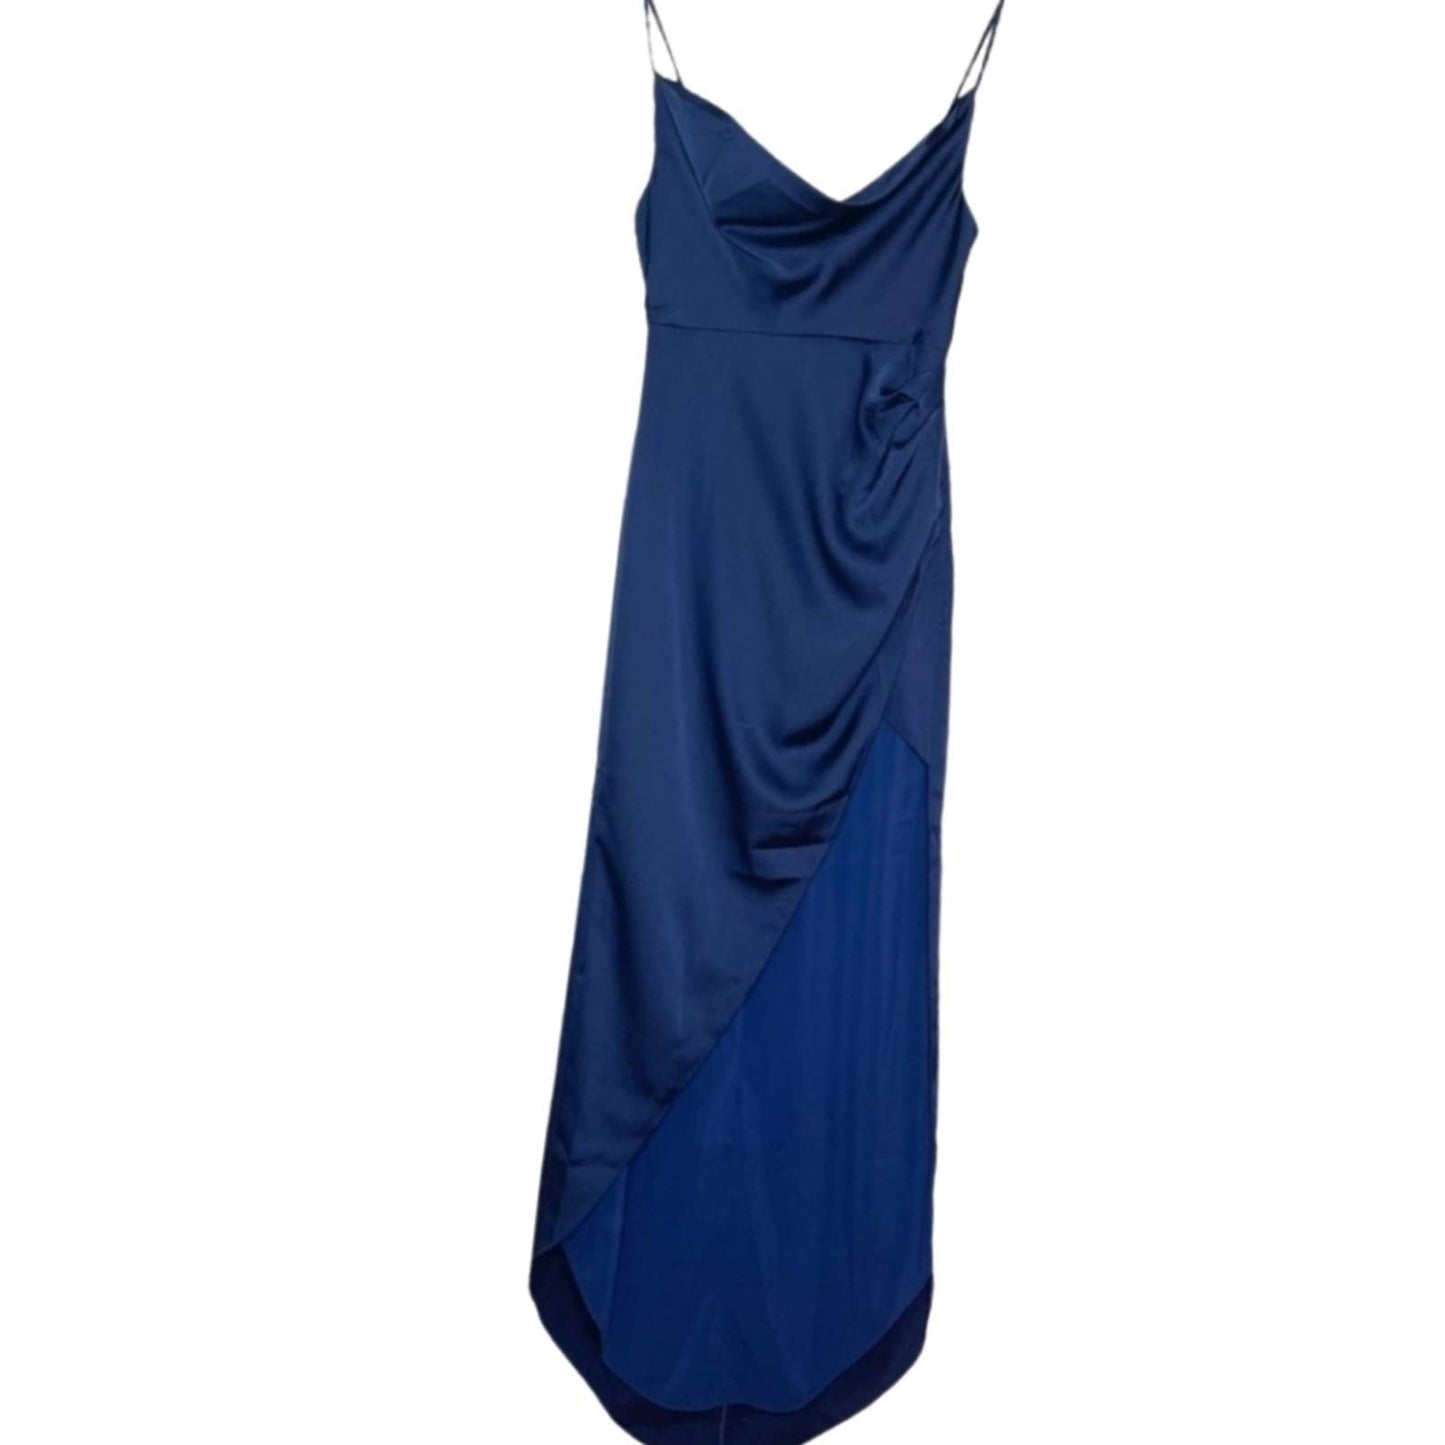 NBD Shelby Gown in Navy NWT Size Small